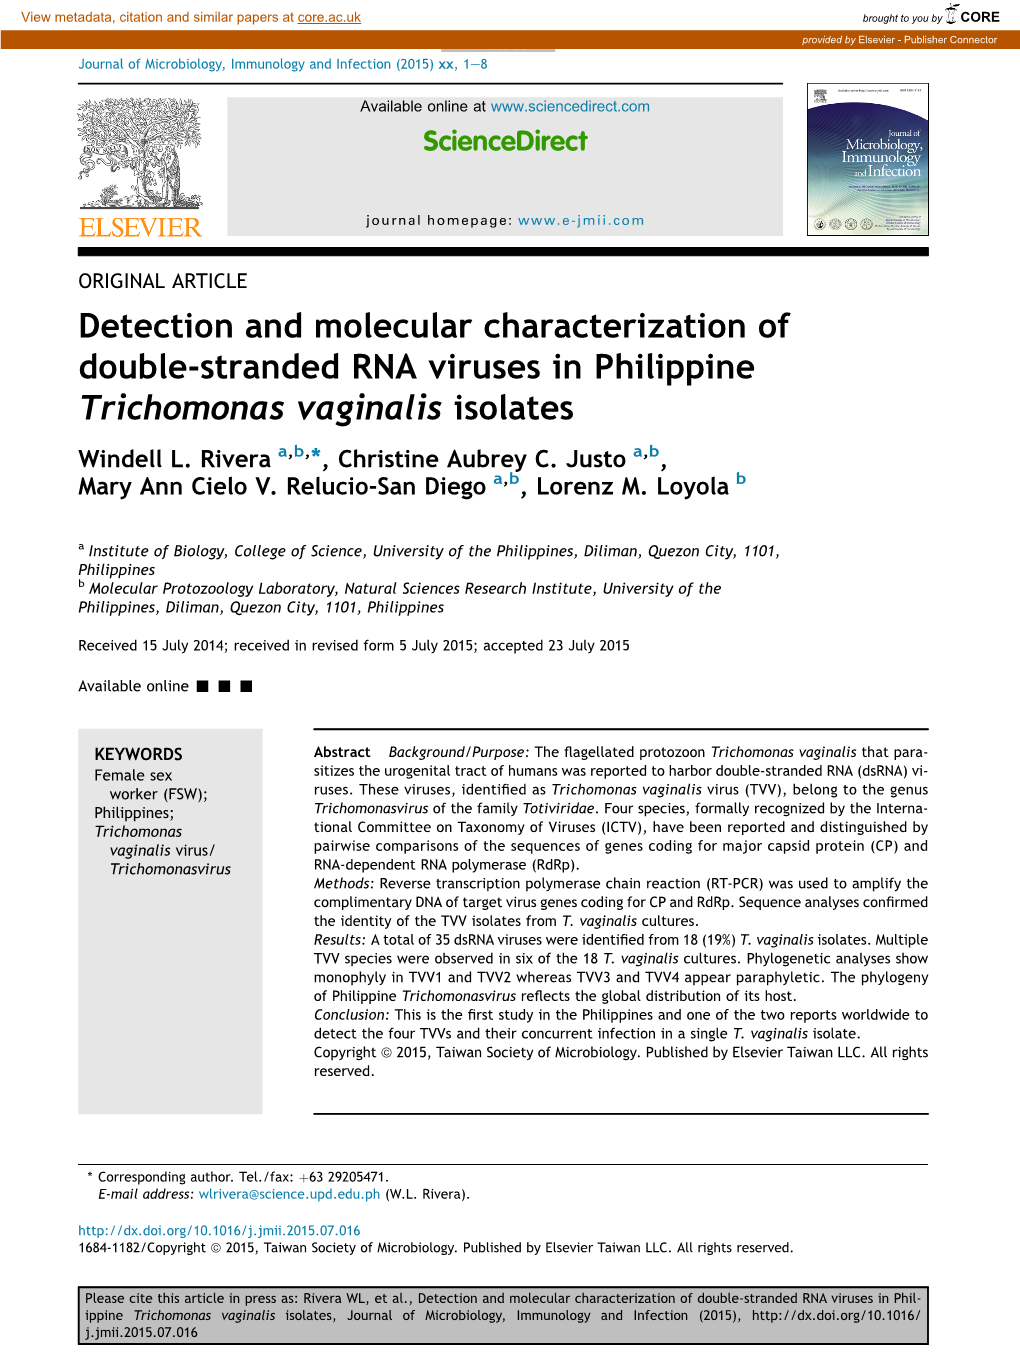 Detection and Molecular Characterization of Double-Stranded RNA Viruses in Philippine Trichomonas Vaginalis Isolates Windell L